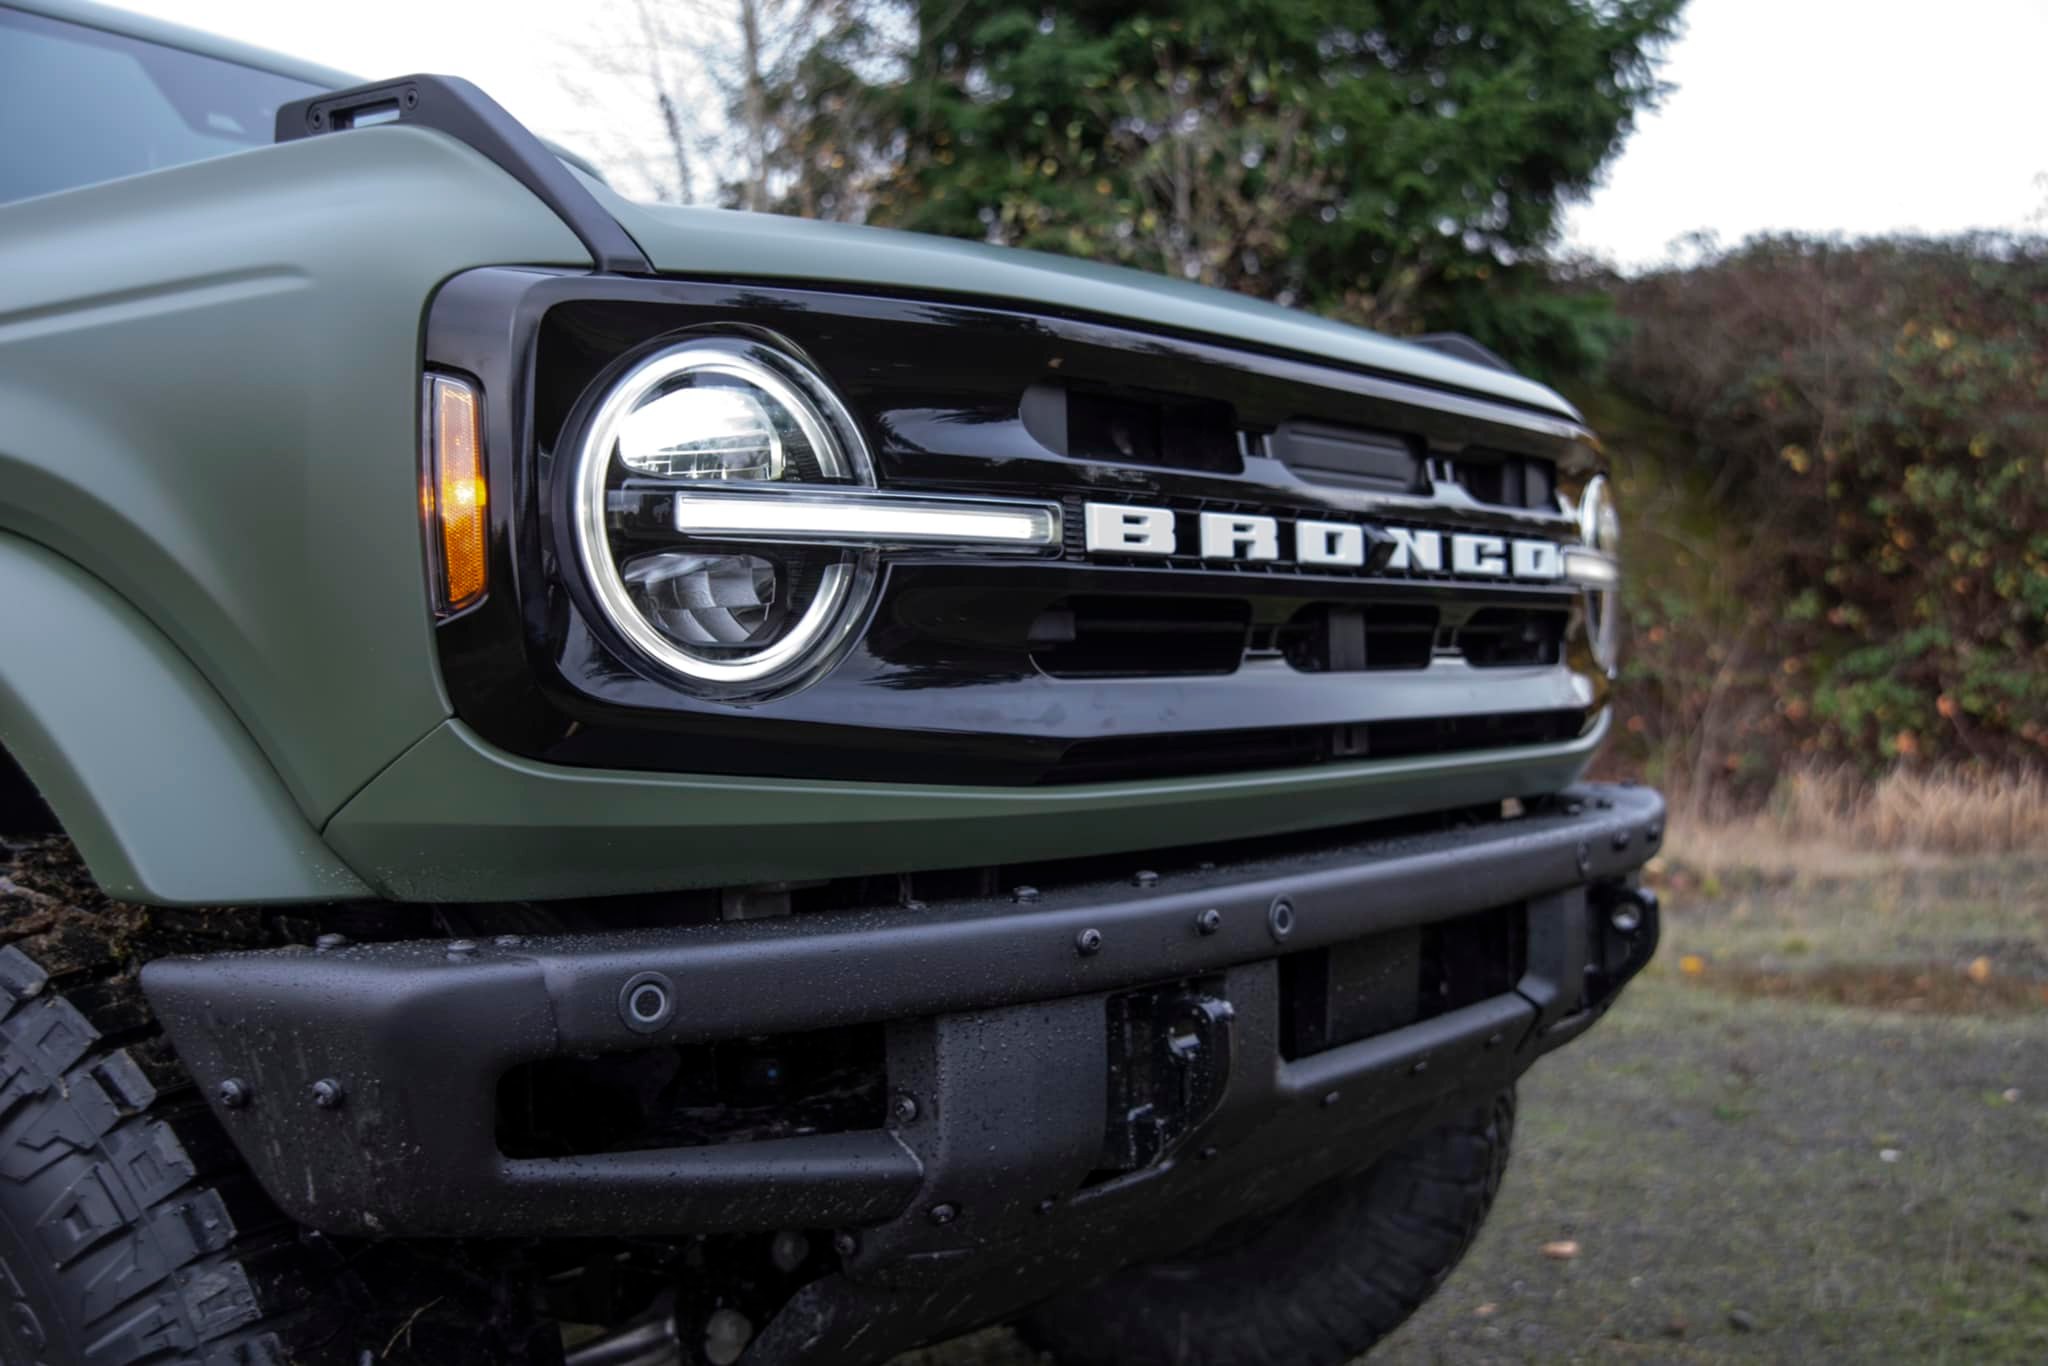 Ford Bronco Satin Military Green 4-Door Bronco Outer Banks Build 262848565_10223985849747330_4717308917960881768_n